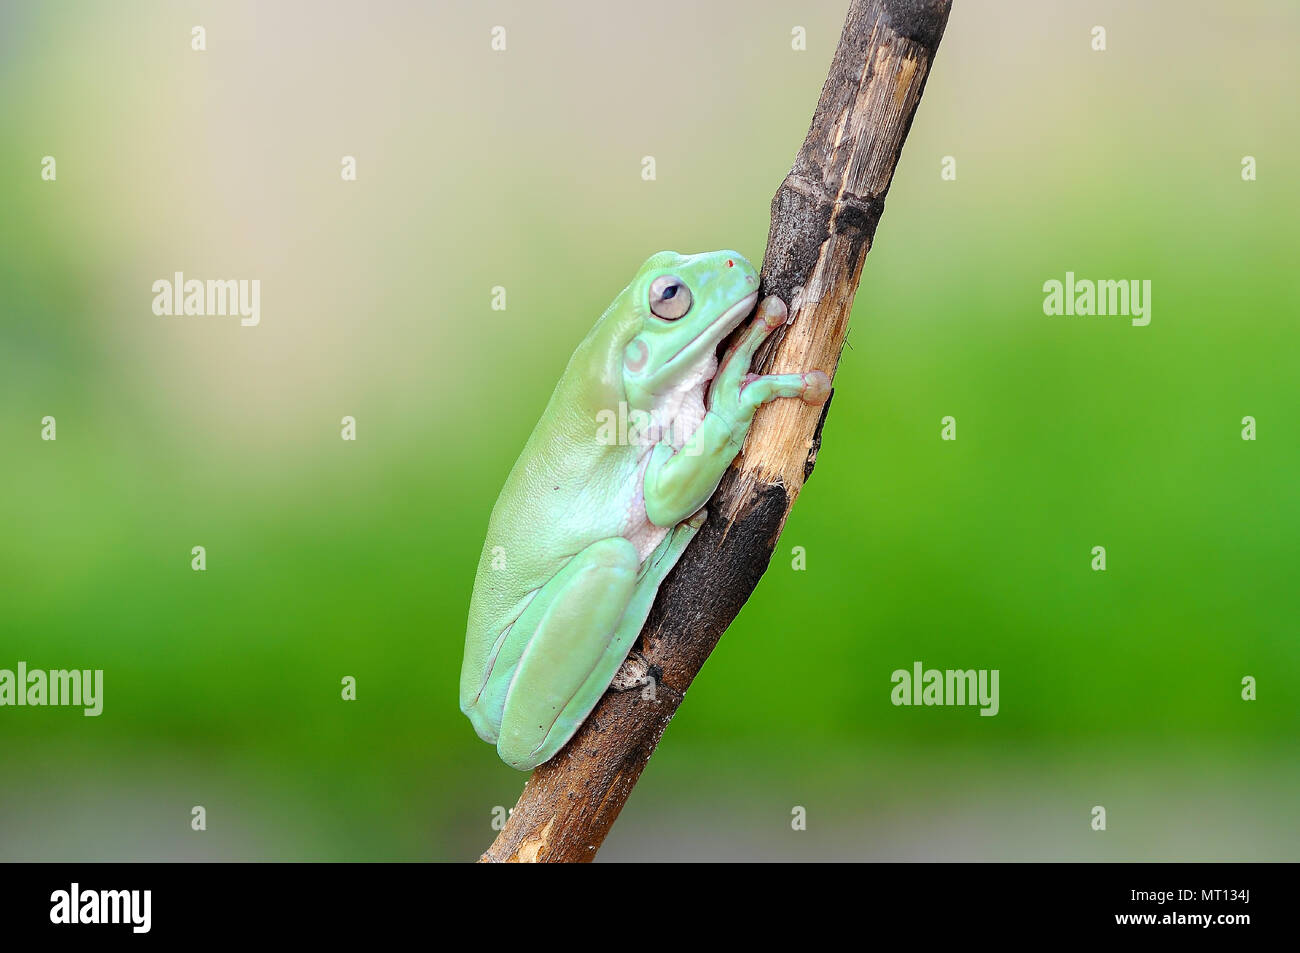 frogs, dumpy frogs, tree frogs on twigs, macro, insect, mammals, animal, reptile, nature, Stock Photo